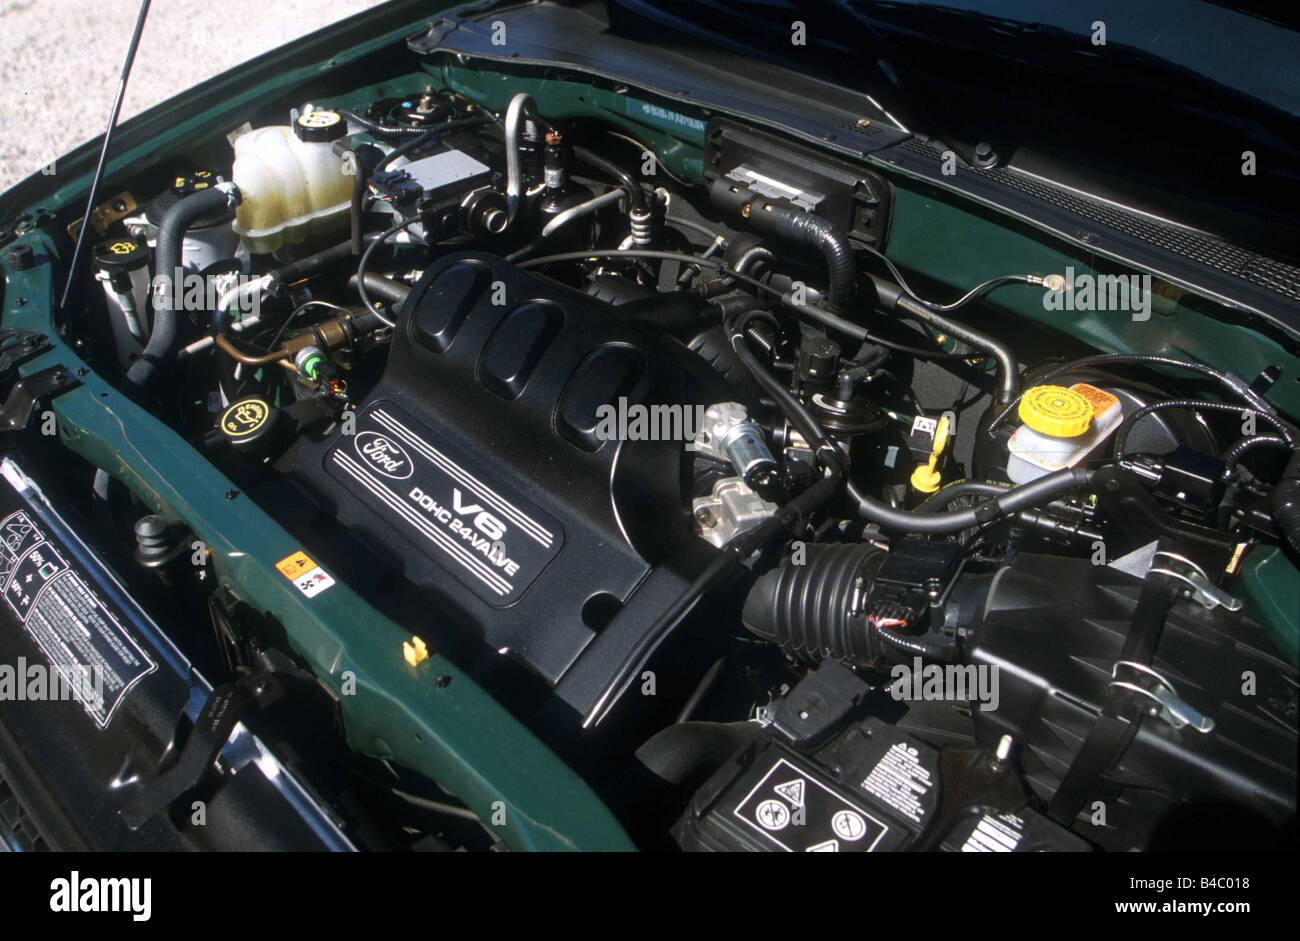 Car, Ford Maverick 3.0 V6, cross country vehicle, model year 2002-, green, view in engine compartment, engine, technique/accesso Stock Photo